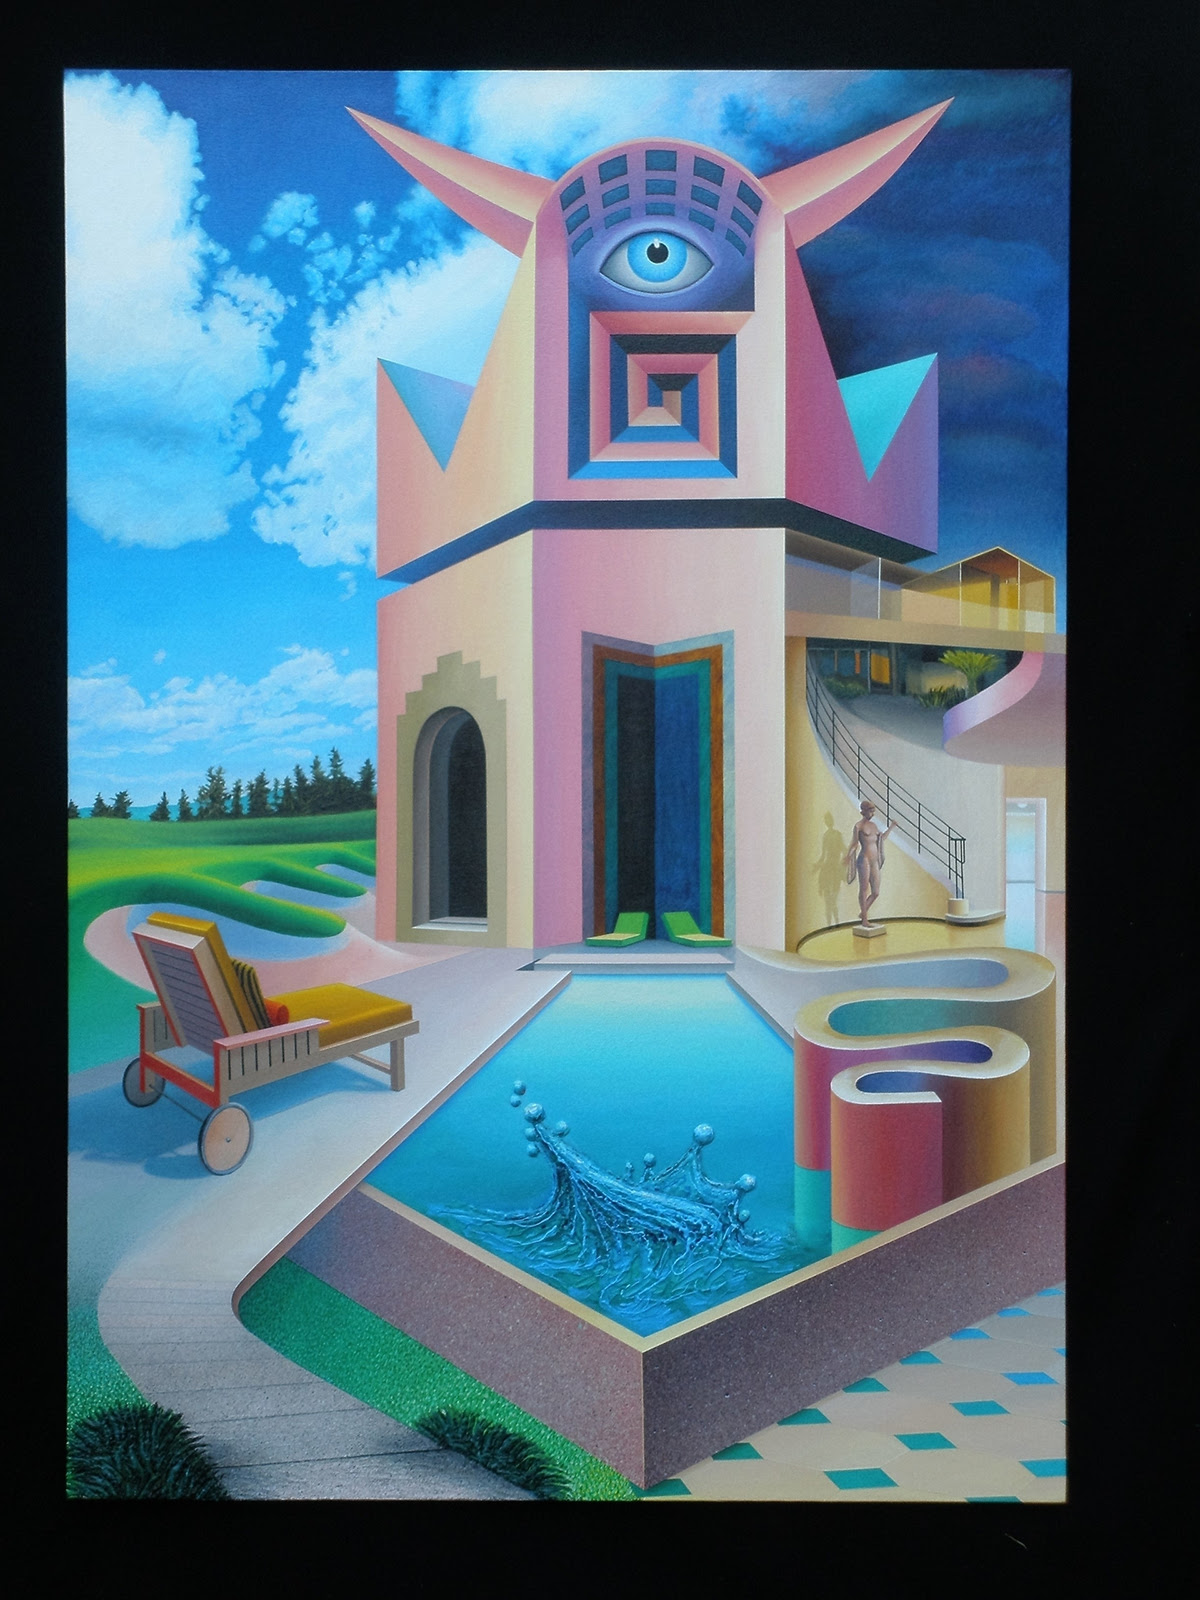 surreal painting of a house